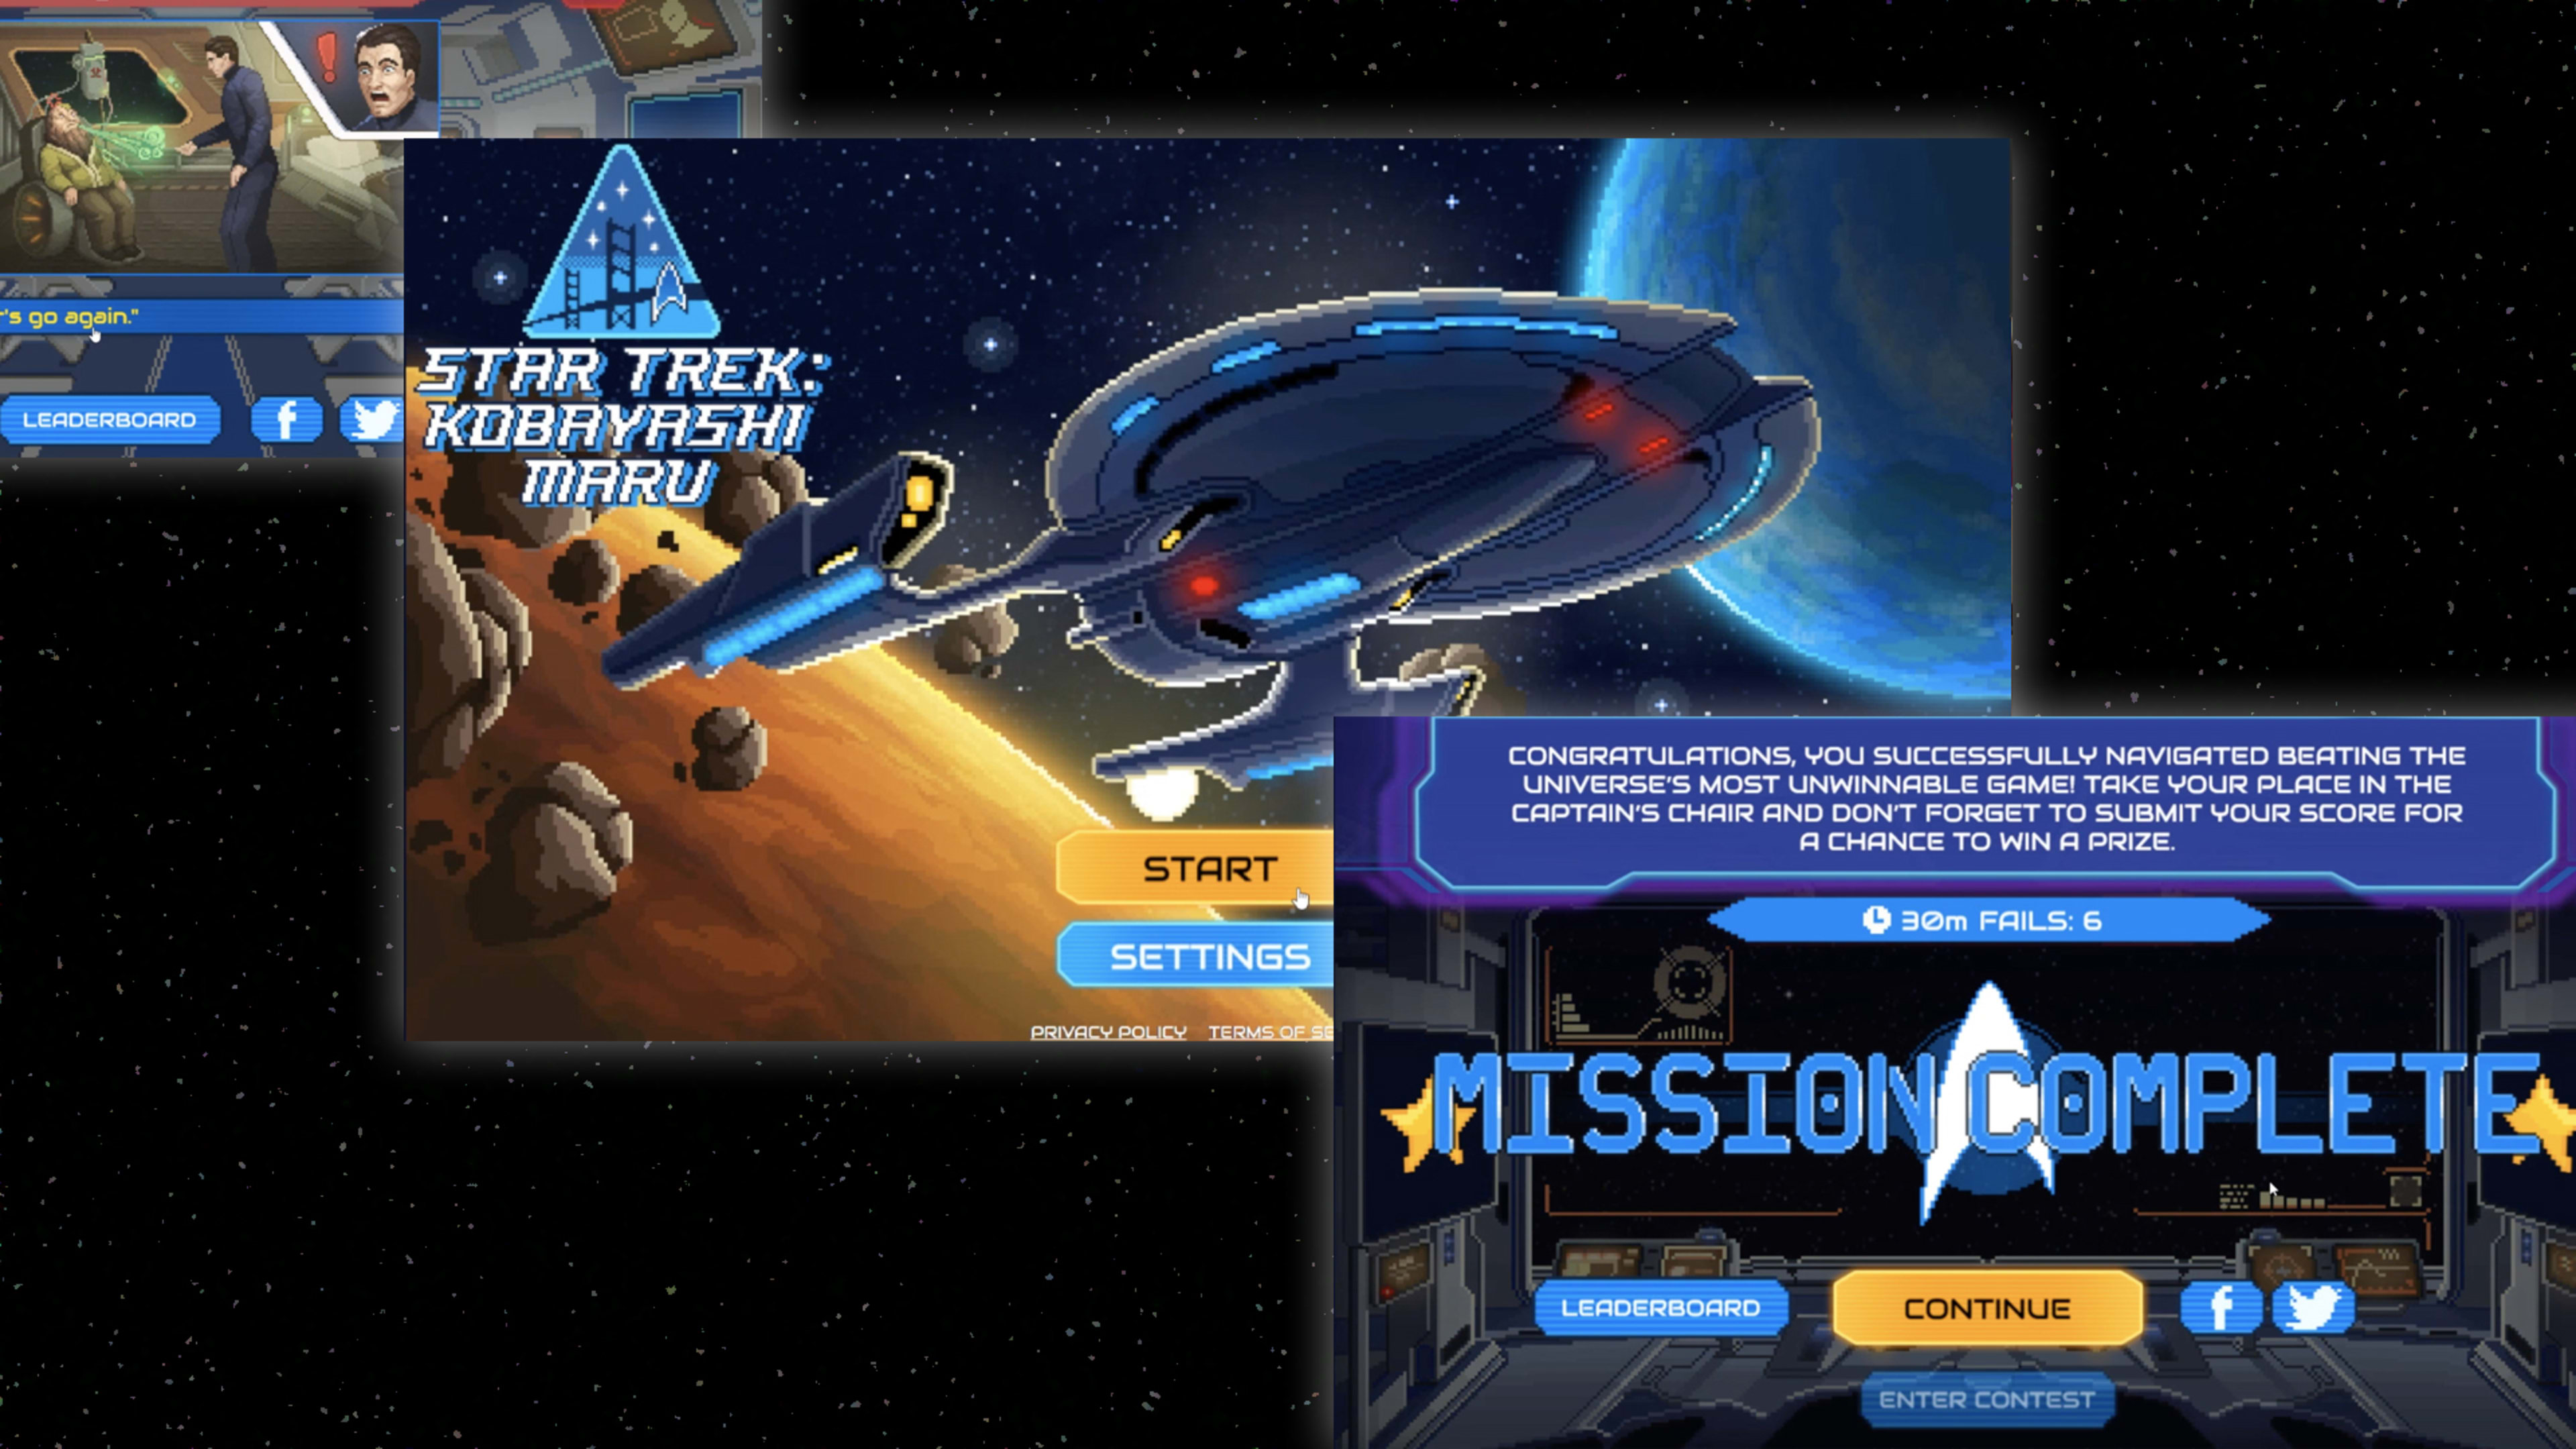 Beat this new ‘Star Trek’ game and get a subscription to CBS All Access for free for life